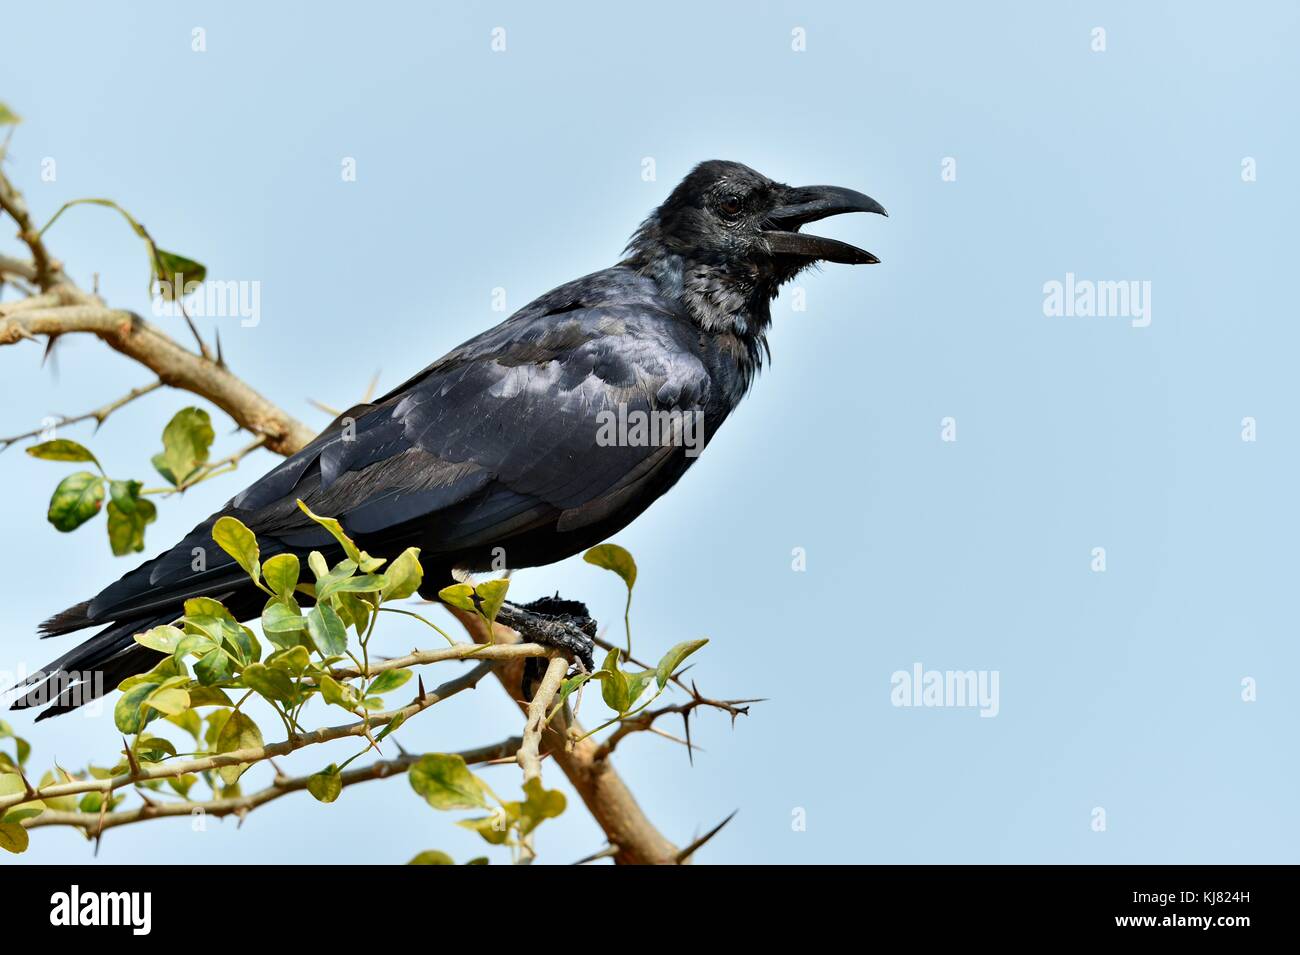 Cawing crow.The Indian jungle crow (Corvus culminatus) on the branch. Blue sky background Stock Photo